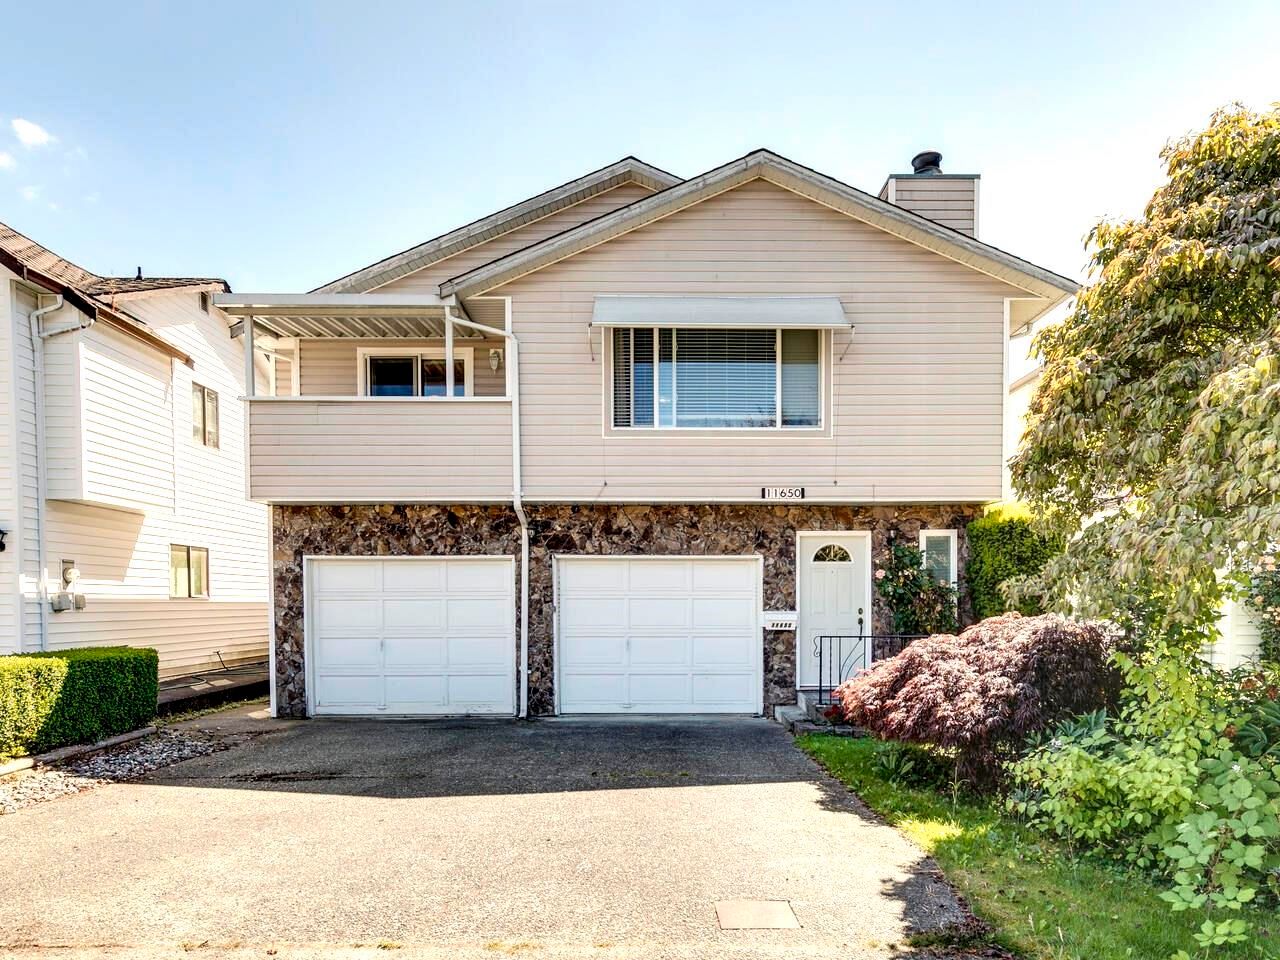 Open House on Sunday, August 28, 2022 2:00PM - 4:00PM
Gramma's house.  This is a home for Buyers wanting a "home" that's spotless, been gently lived in, has a great location & at this price, is a great buy!!!  See for yourself.  Someone's go